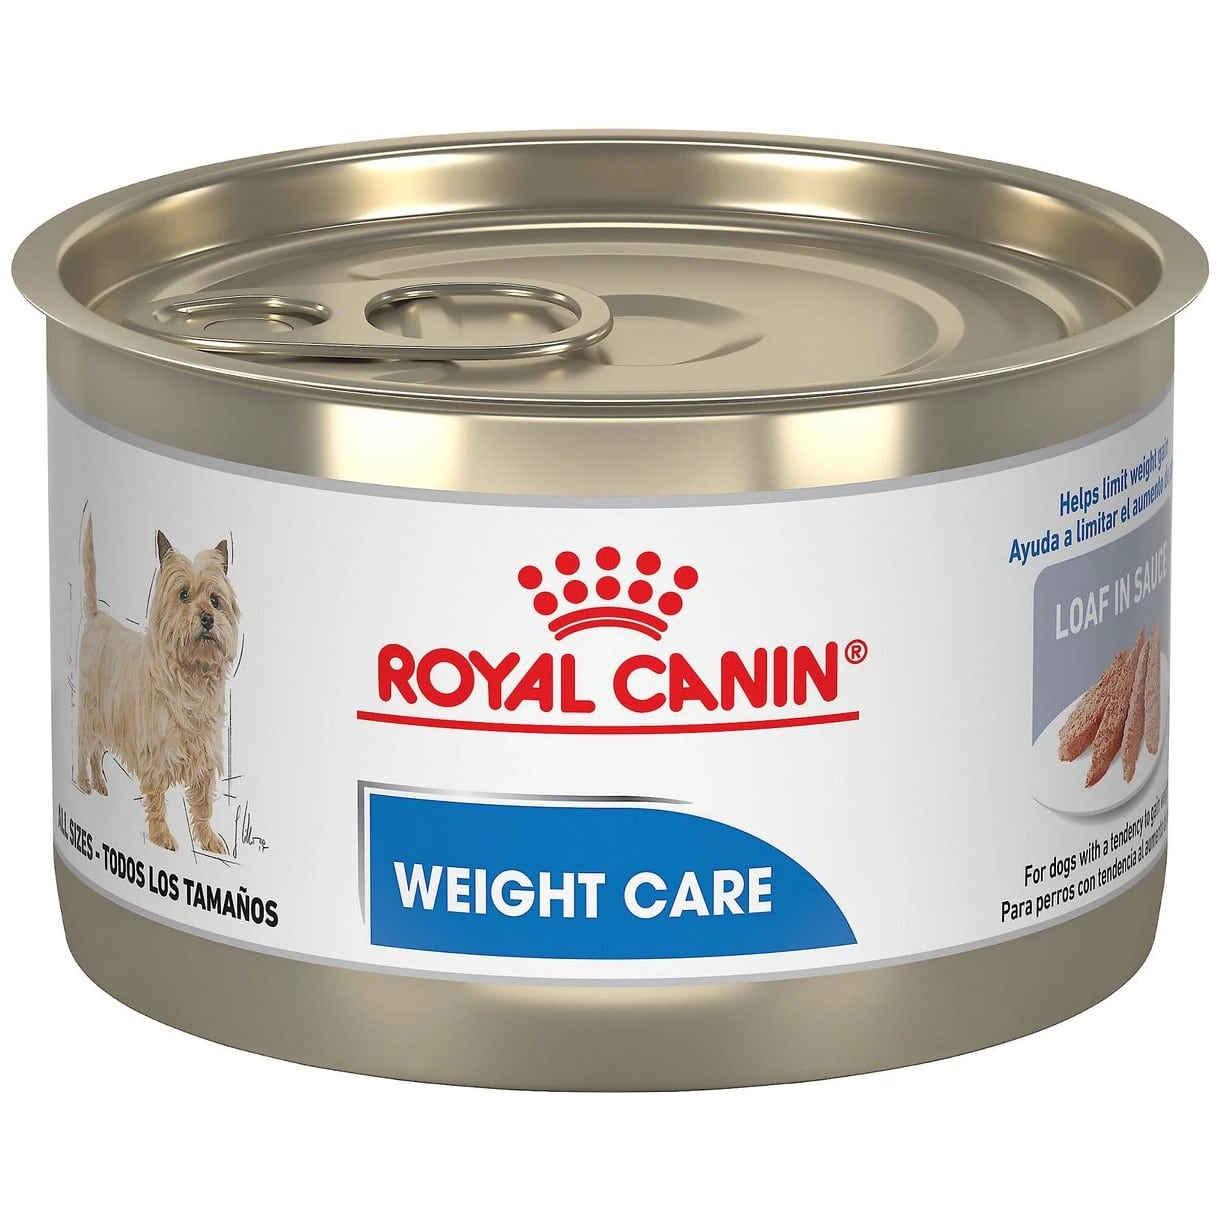 Royal Canin Canine Care Nutrition Weight Care Loaf in Sauce Canned Dog Food